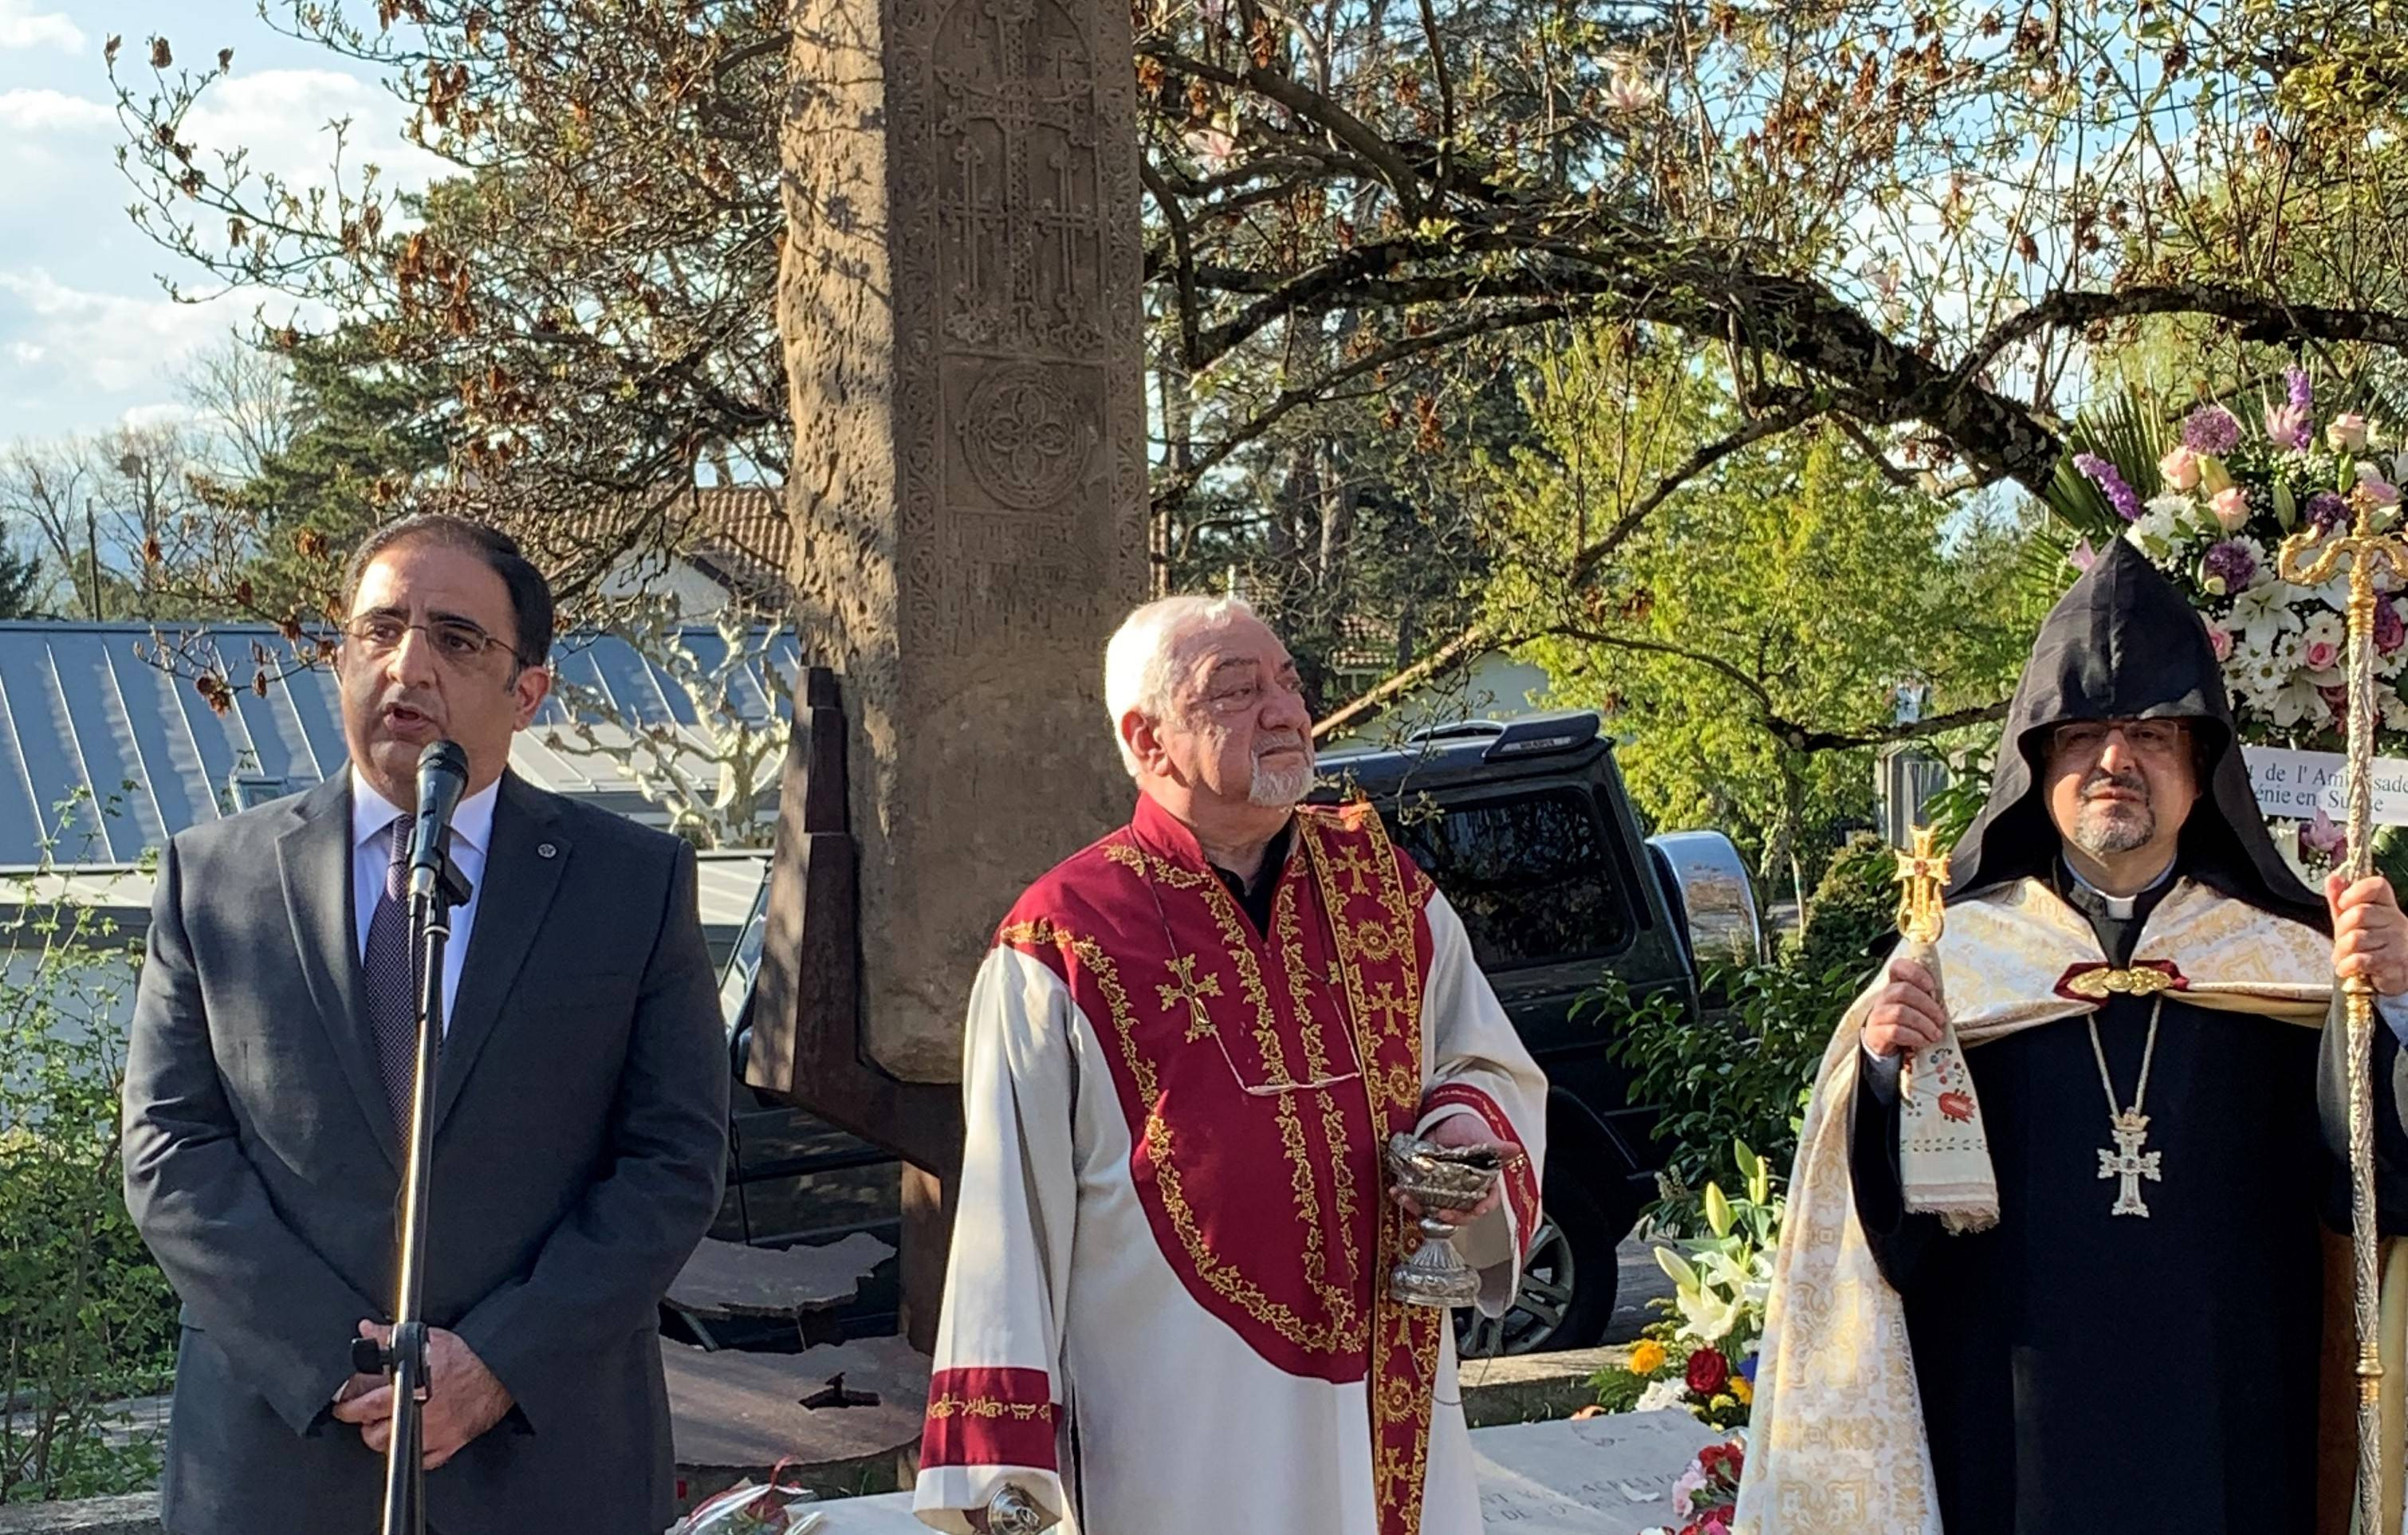 The commemoration  of the 106th Anniversary  of the Armenian Genocide in Switzerland